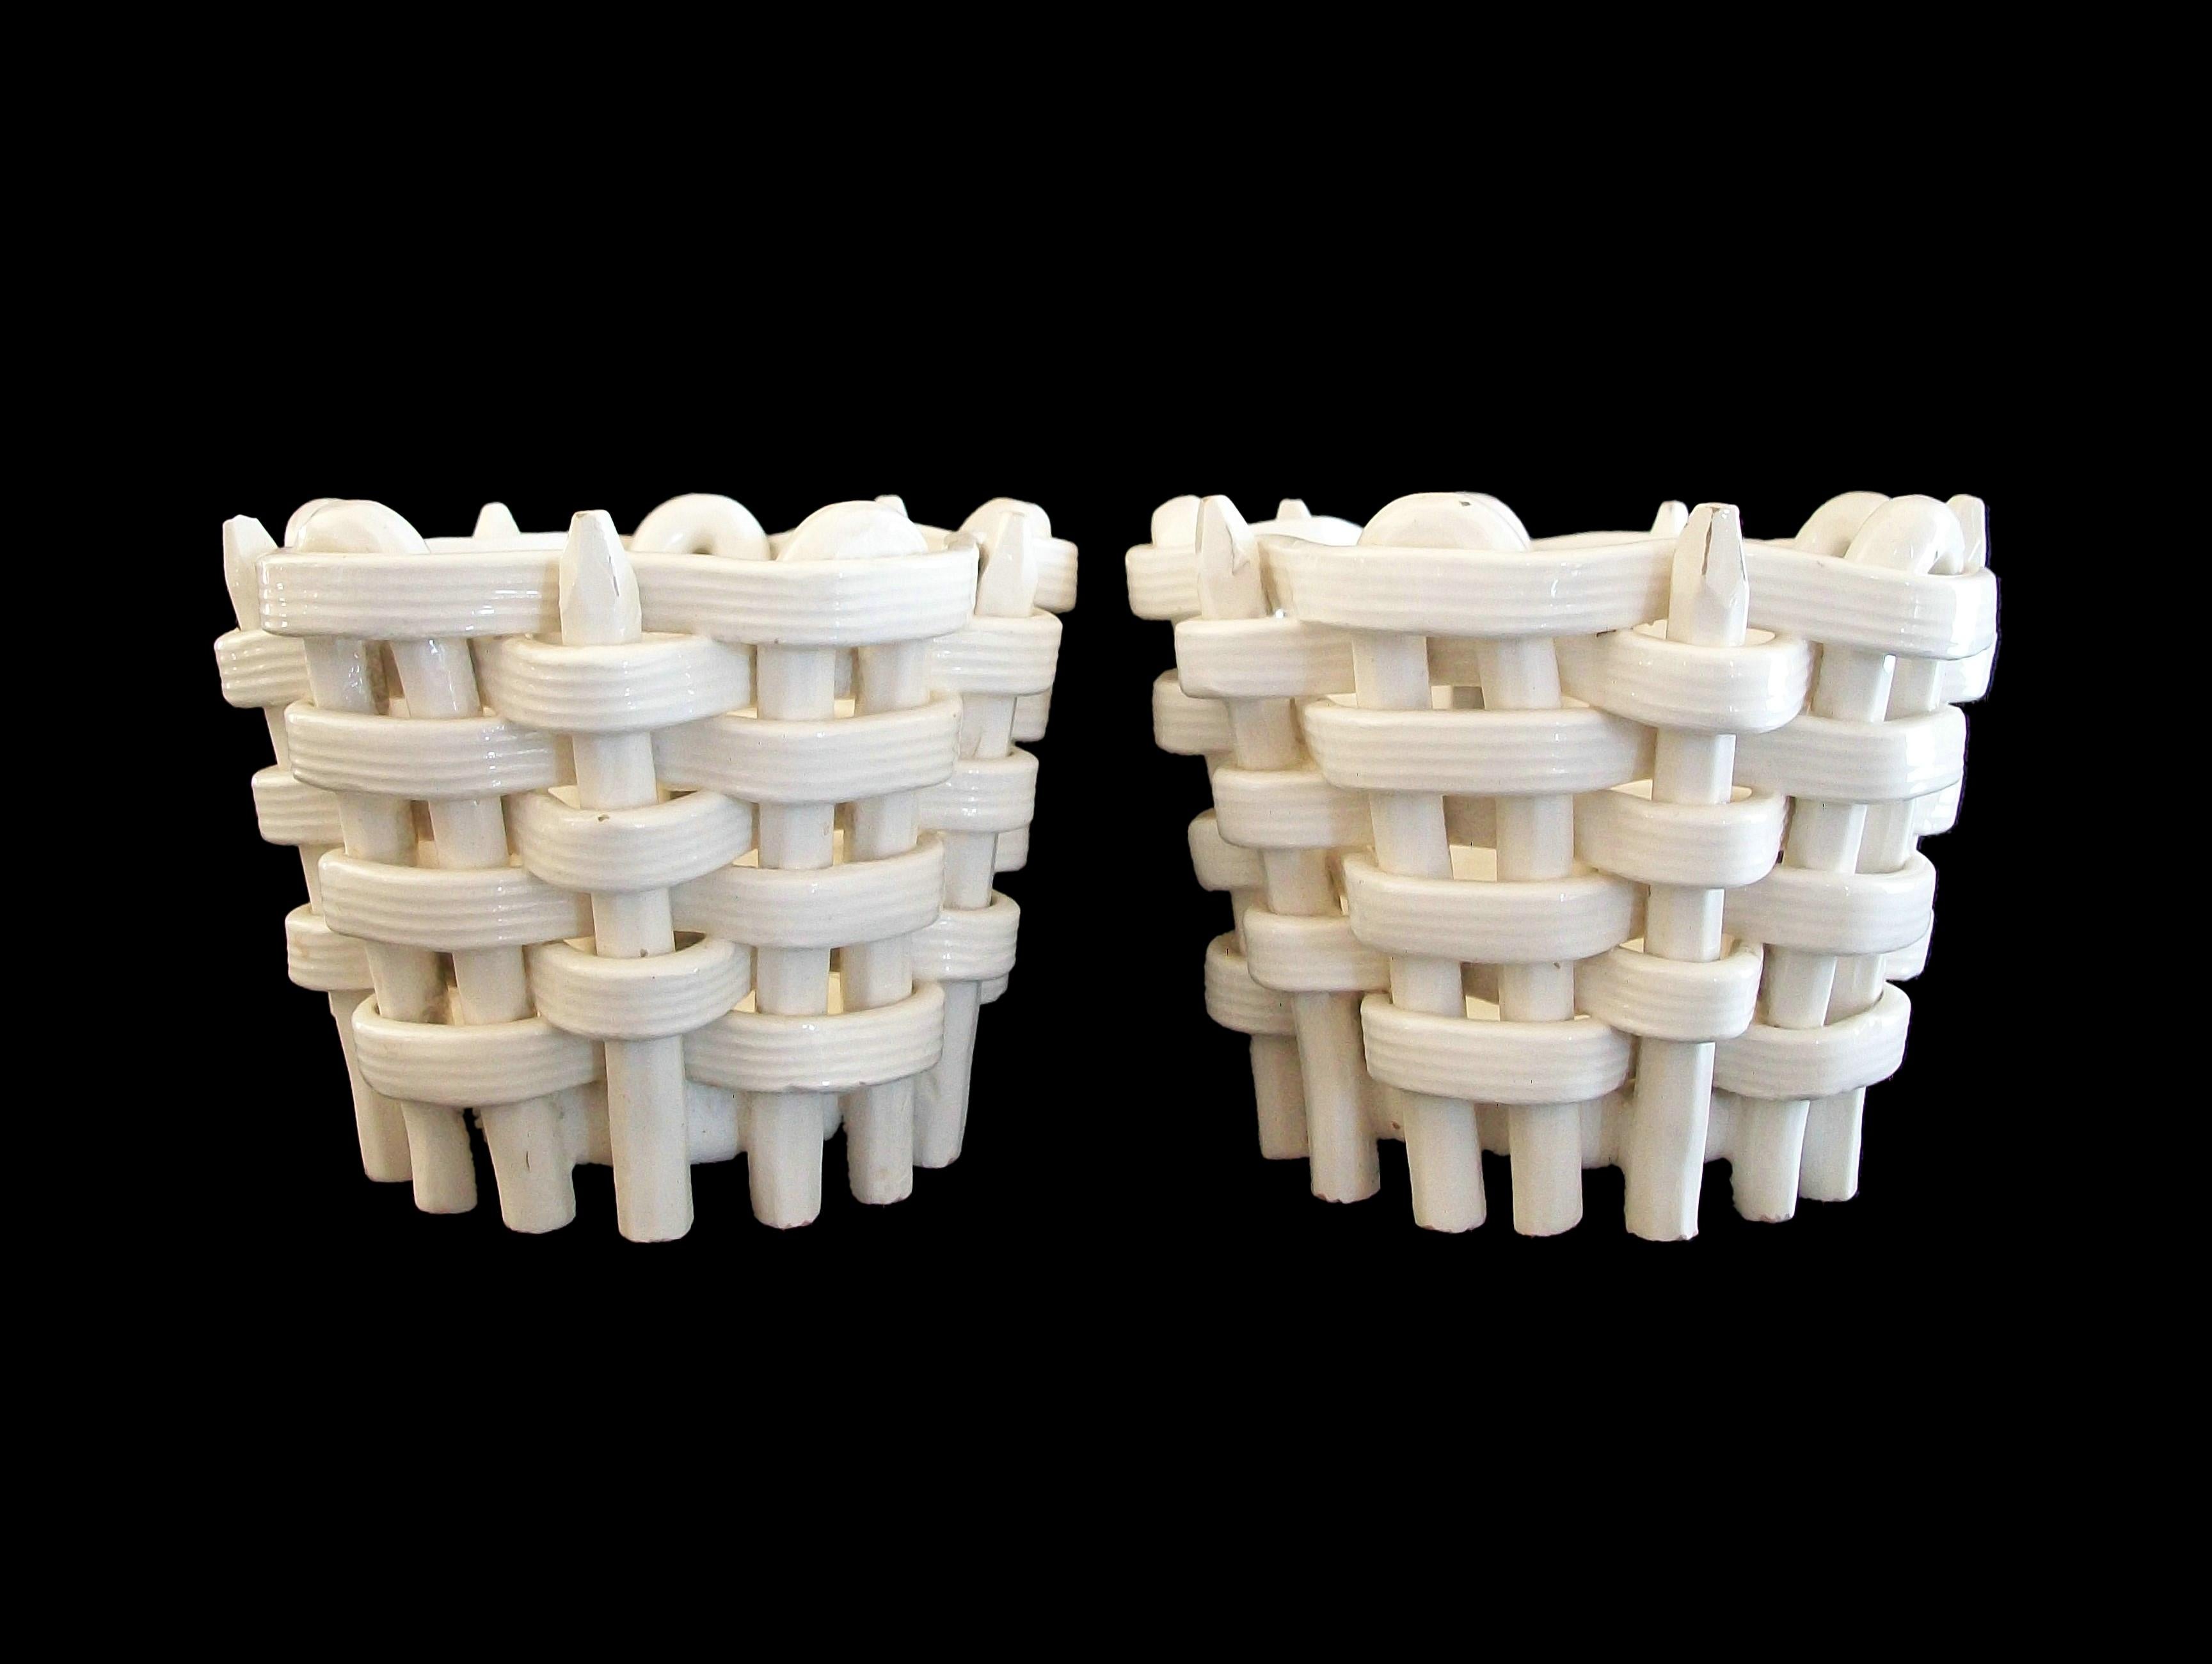 MAX ROESLER (Manufacturer) - Rare pair of basket weave ceramic cachepots / planters - white ceramic body with an over-all clear glaze - signed on the base (impressed mark) - Germany - circa 1910.

Excellent antique condition - chip to one support -